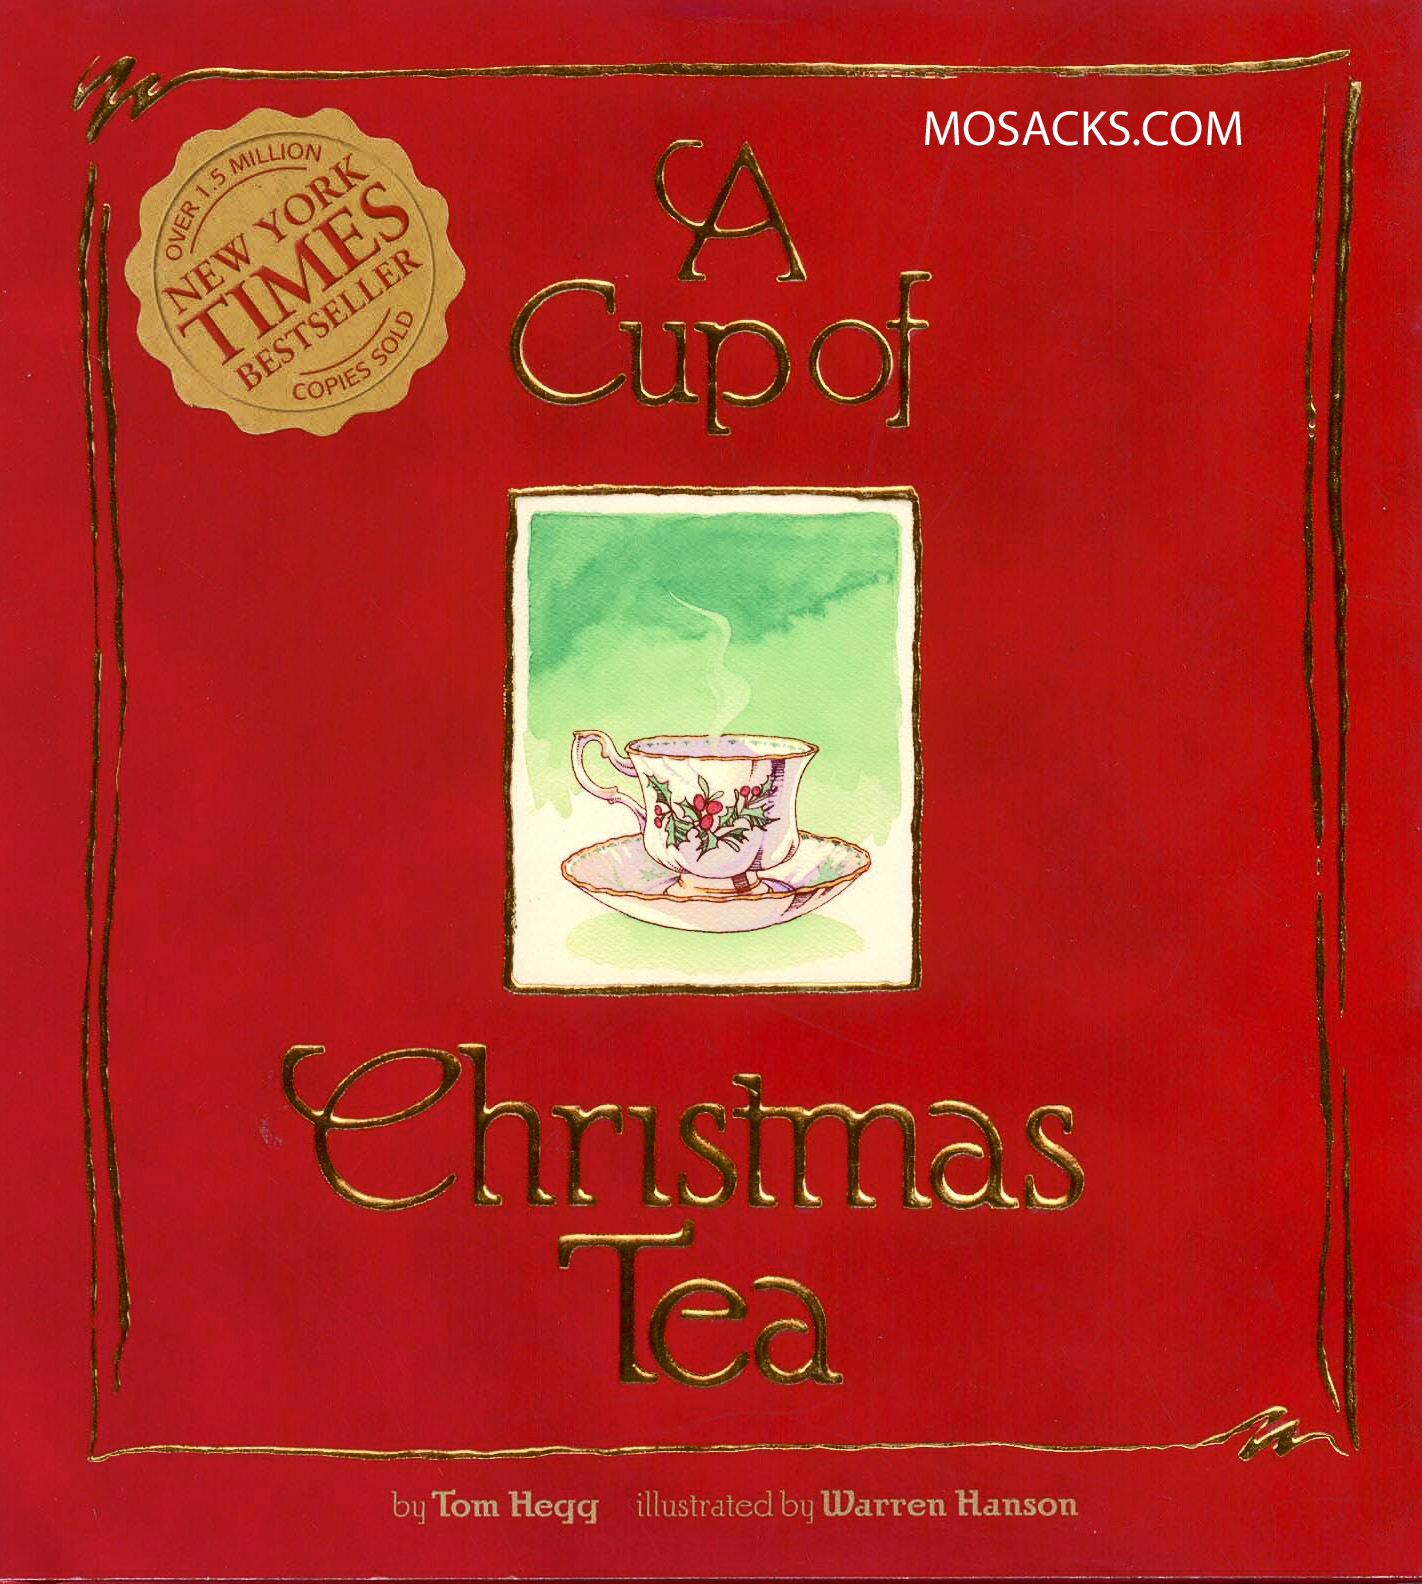  A Cup of Christmas Tea by Tom Hegg